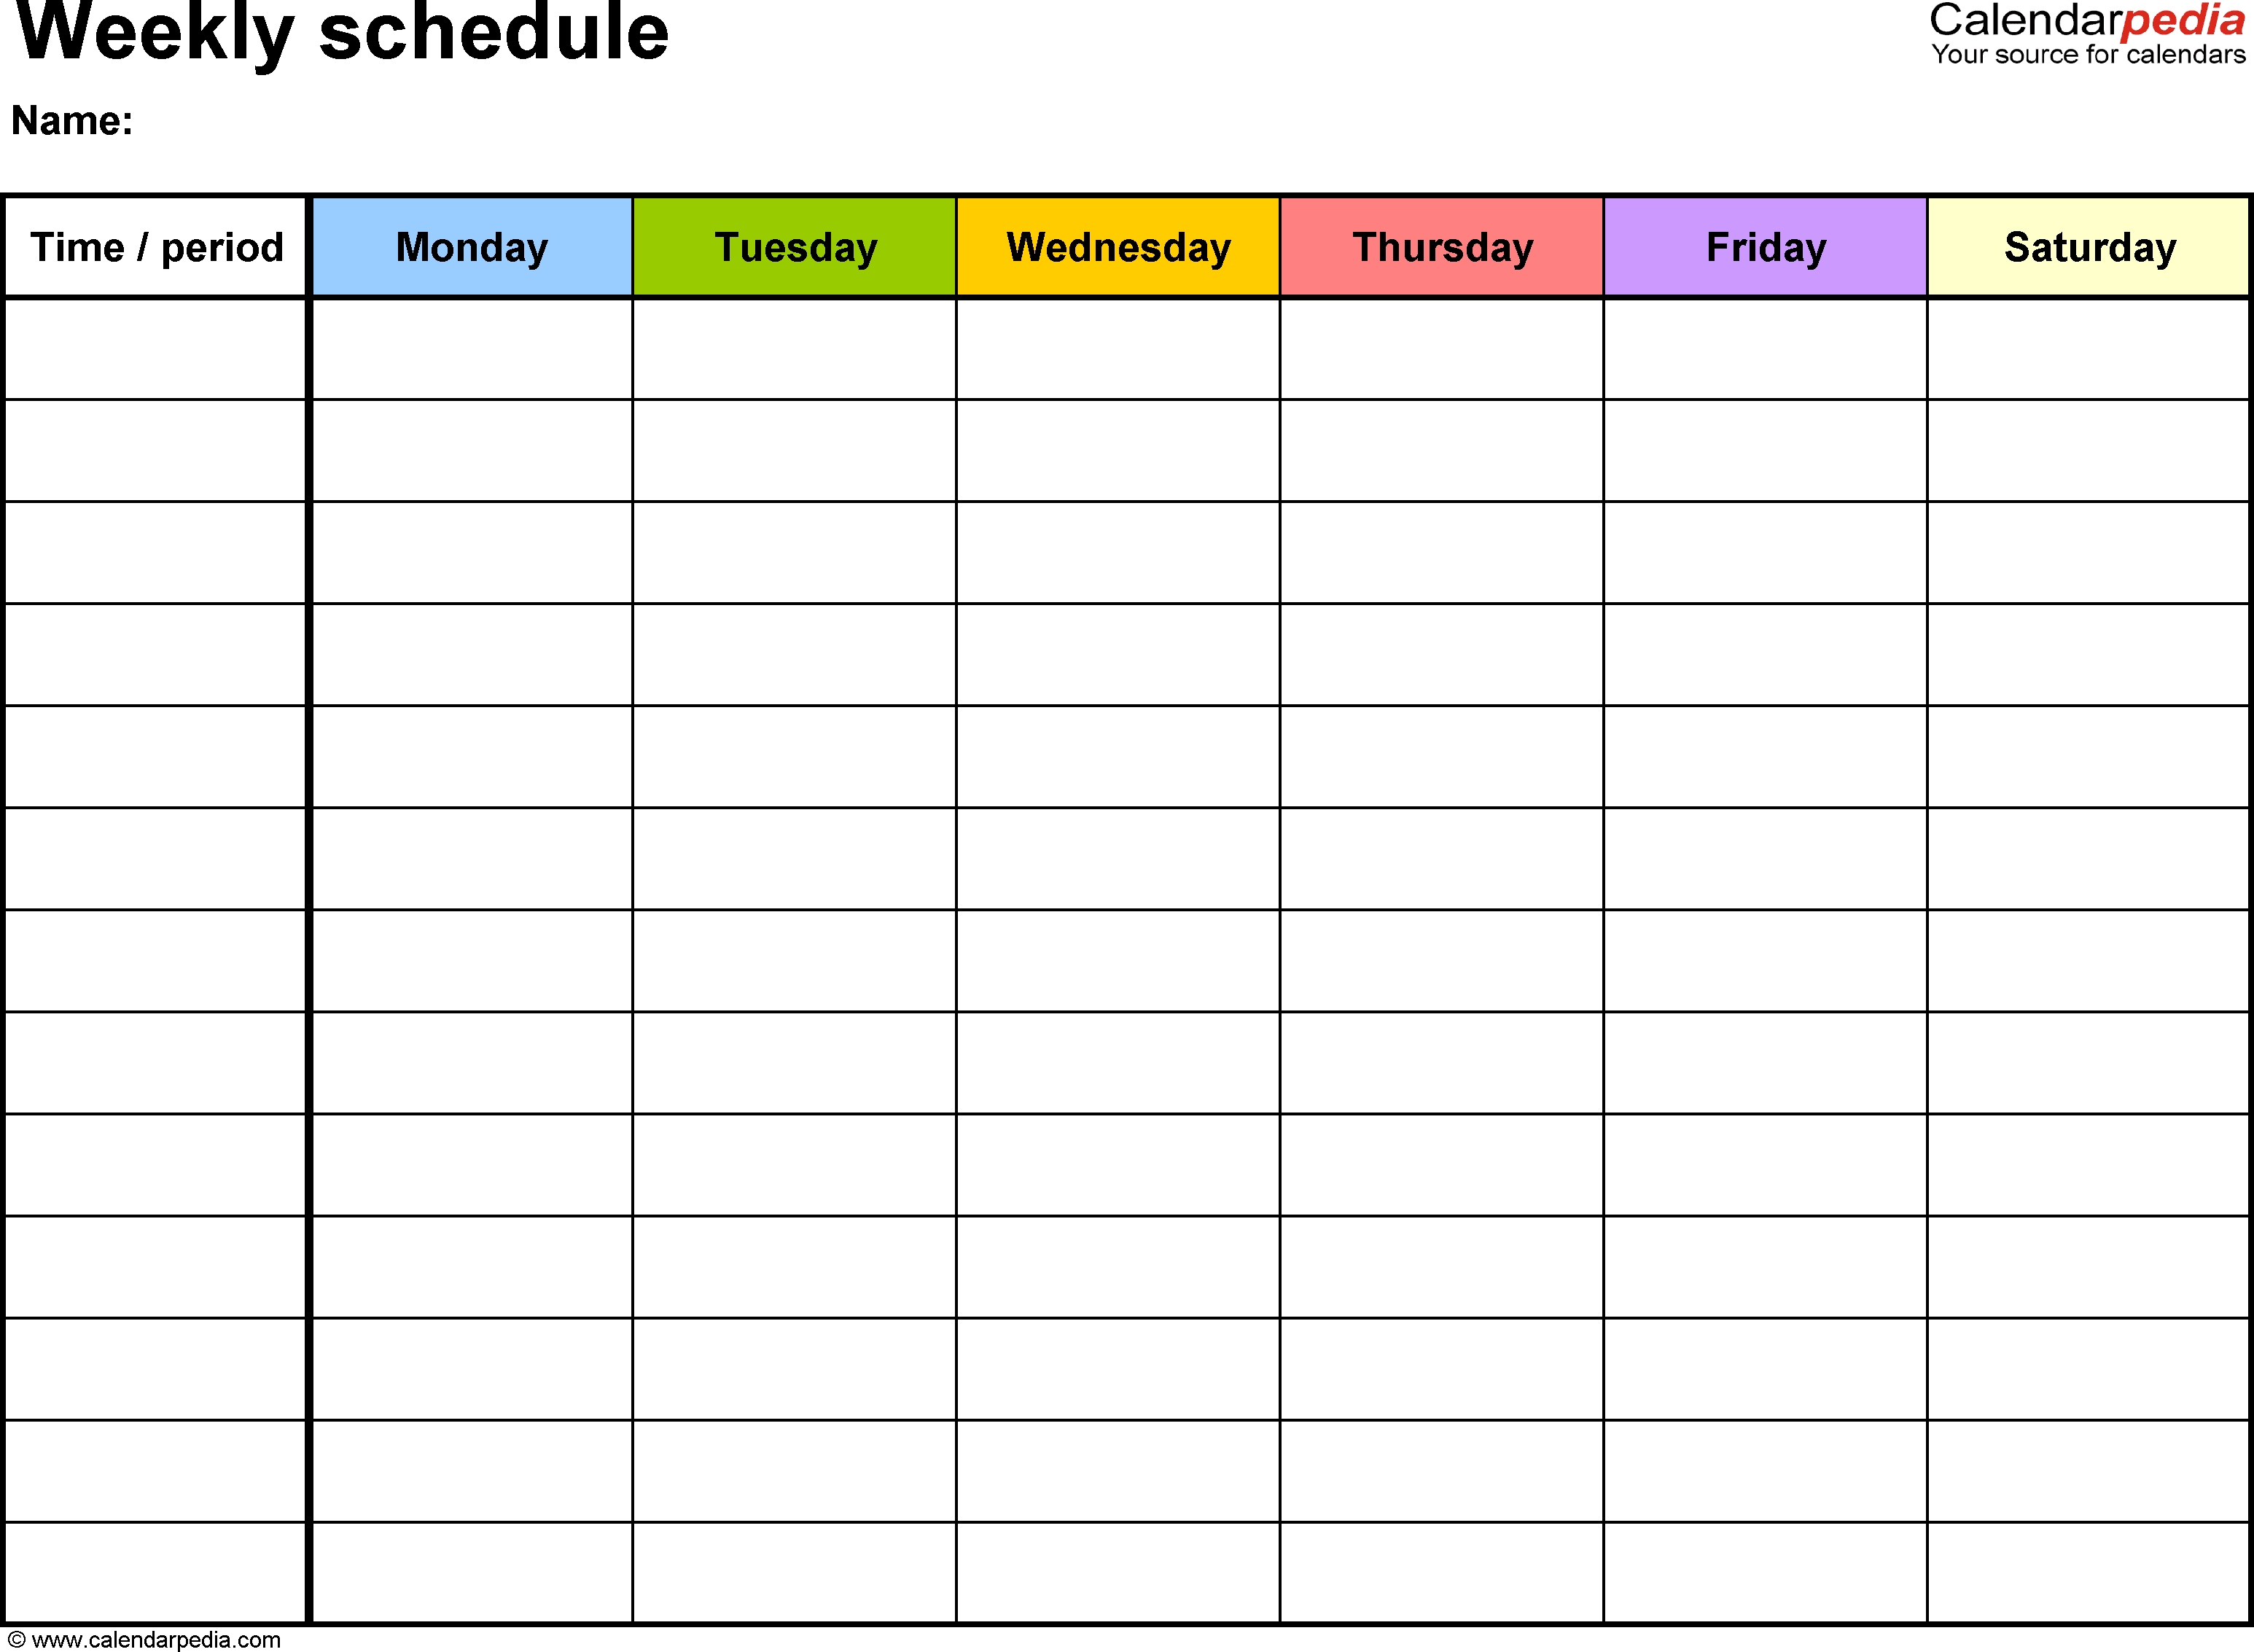 Free Weekly Schedule Templates For Word - 18 Templates-Monday To Sunday Monthly Fillable Calendar